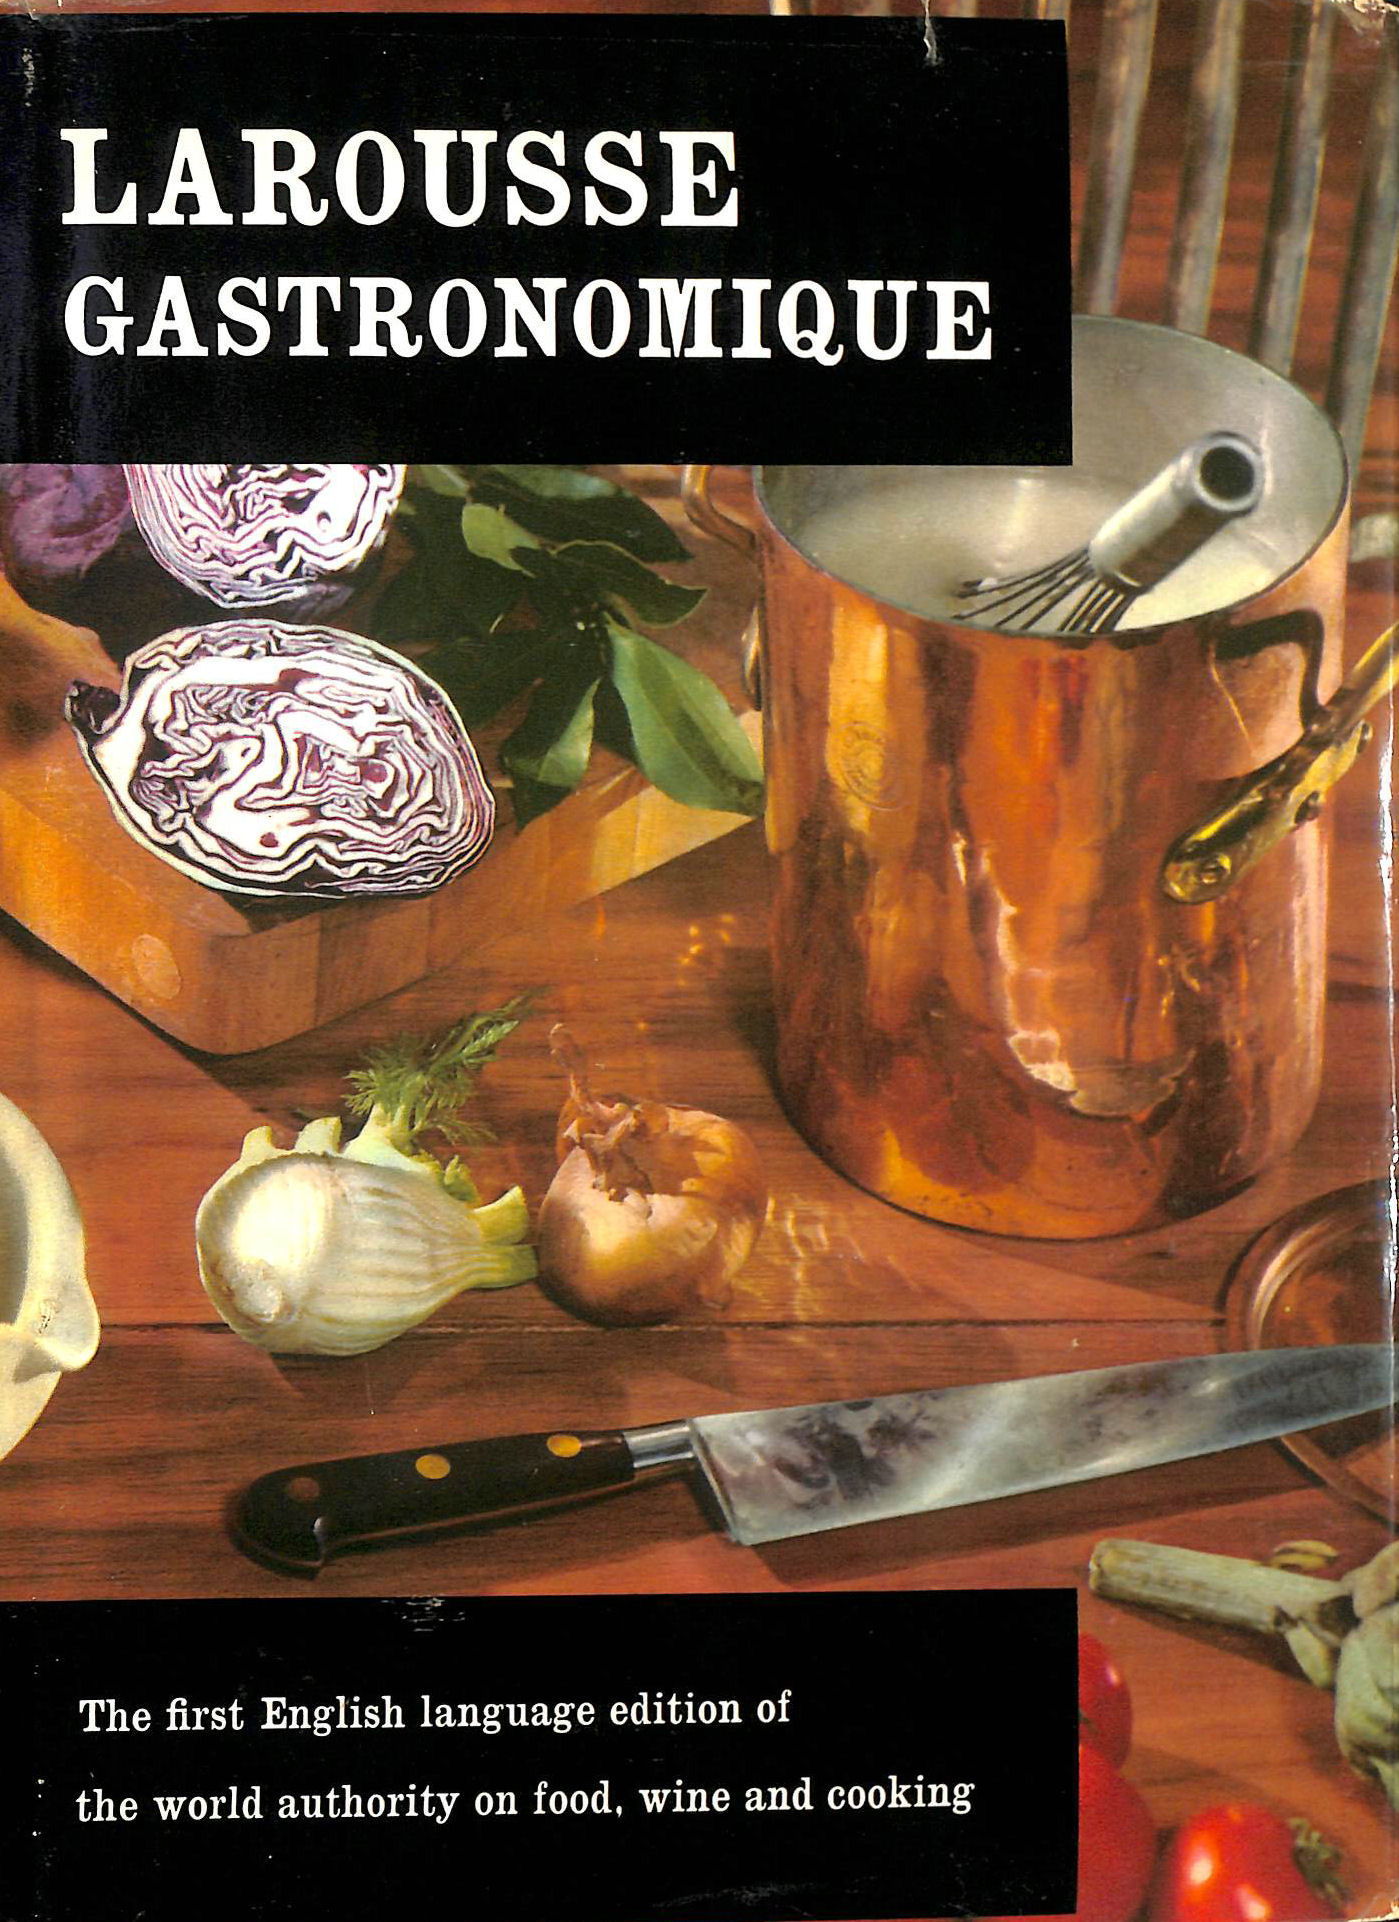 Larousse Gastronomique. The Encyclopedia of Food, Wine and Cooking.